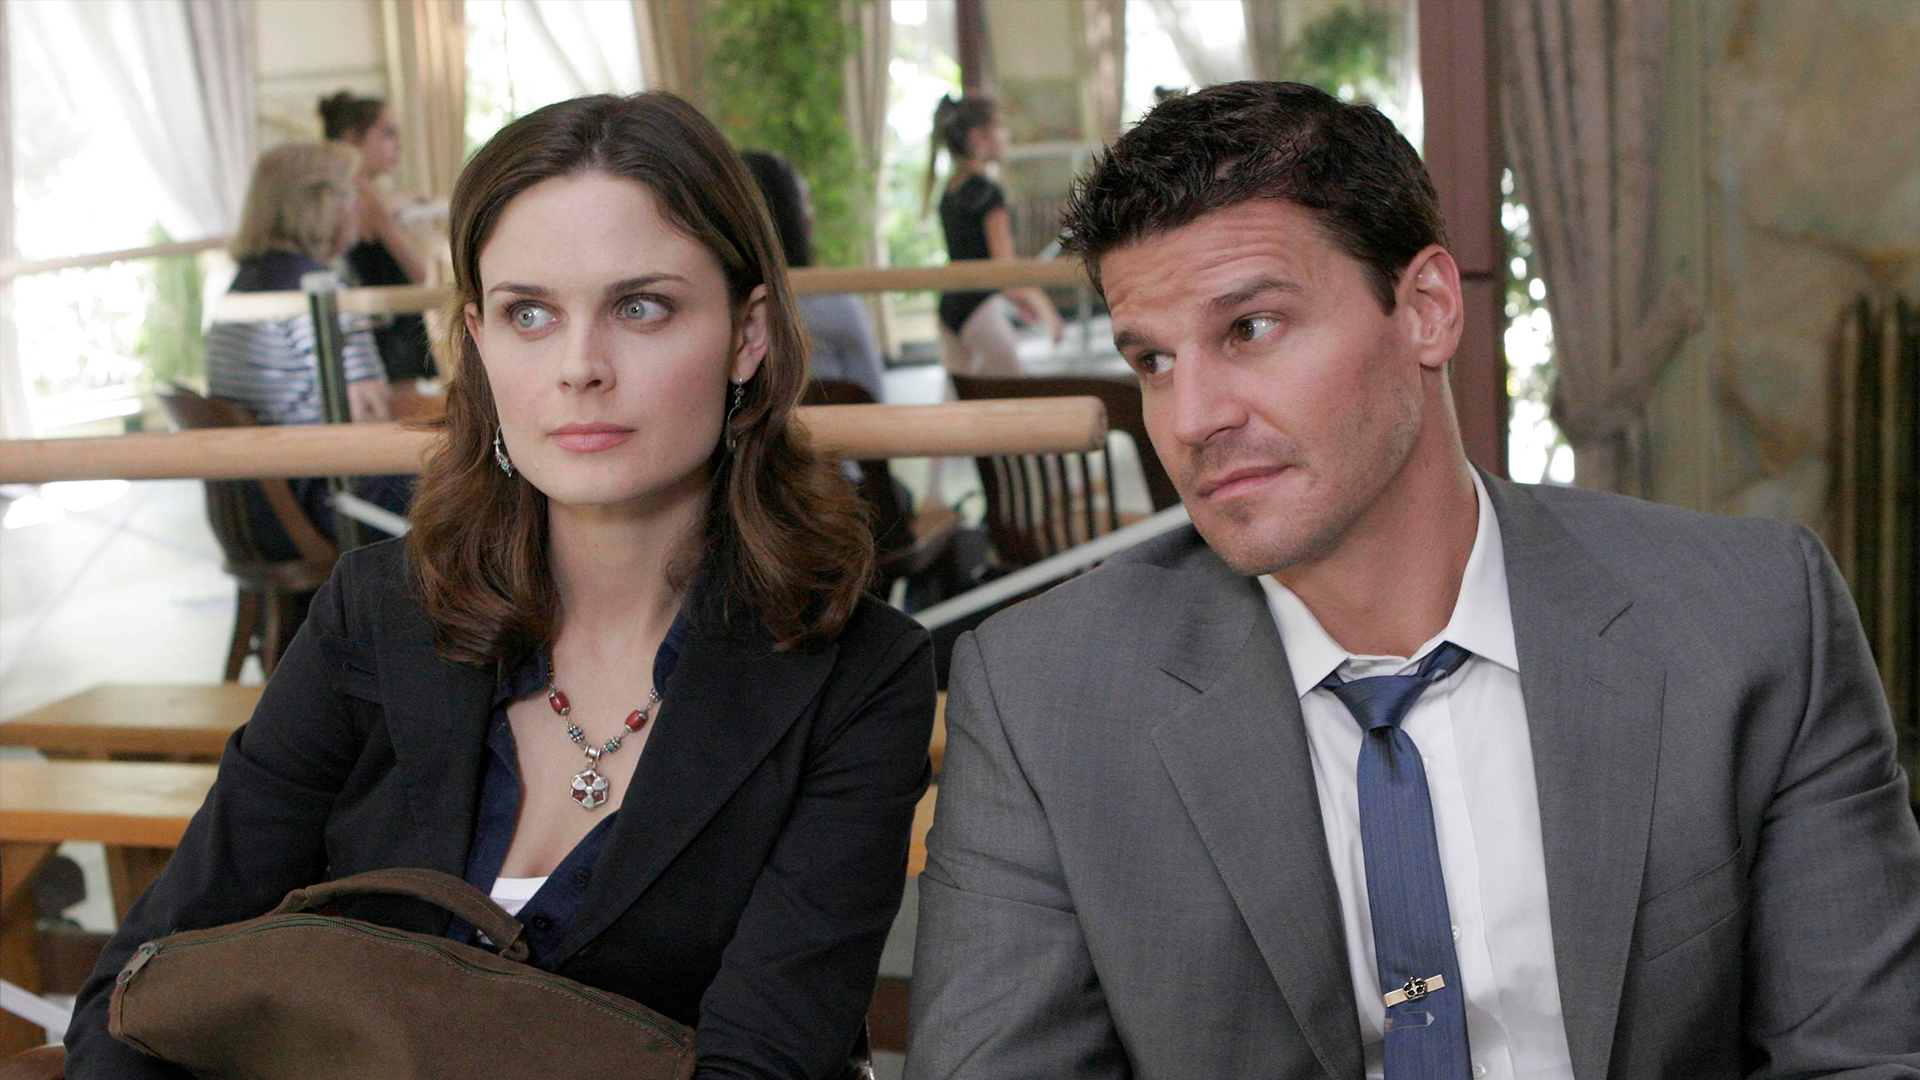 Bones Season 2 Episode 7 - The Girl with the Curl